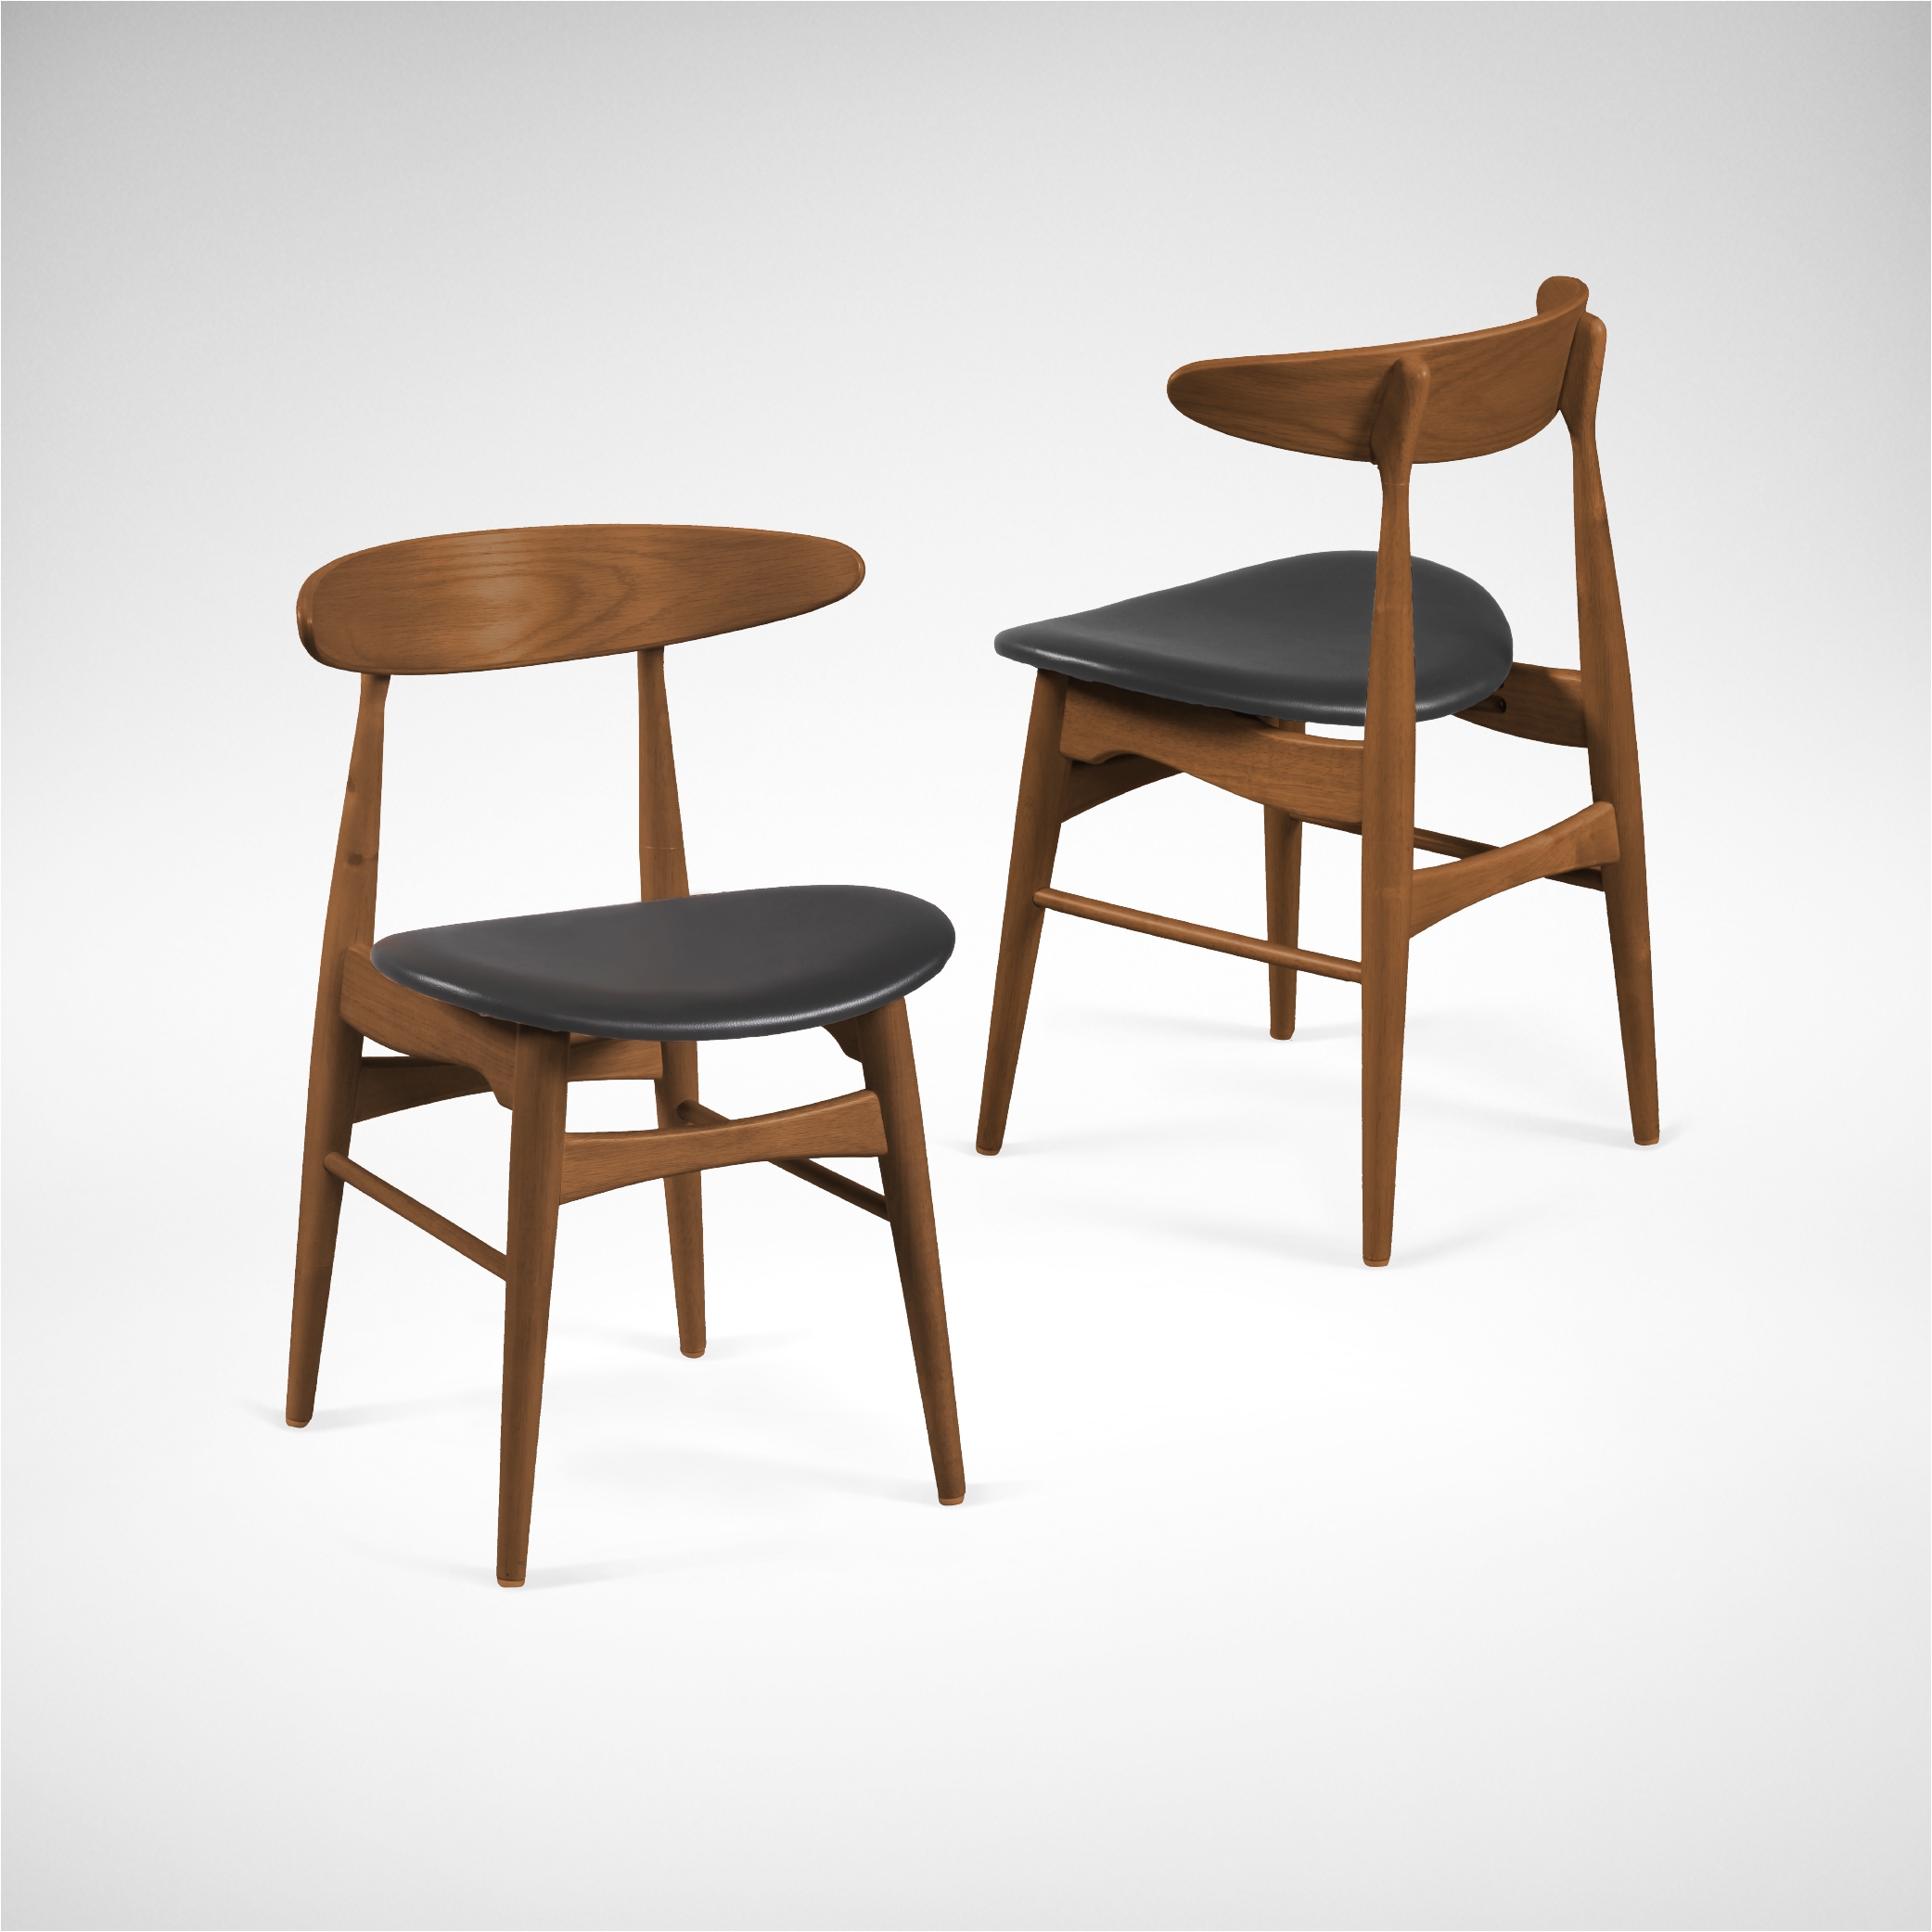 Wooden Chairs for Rent Manila Hanoi Chair Cocoa Comfort Design the Chair Table People